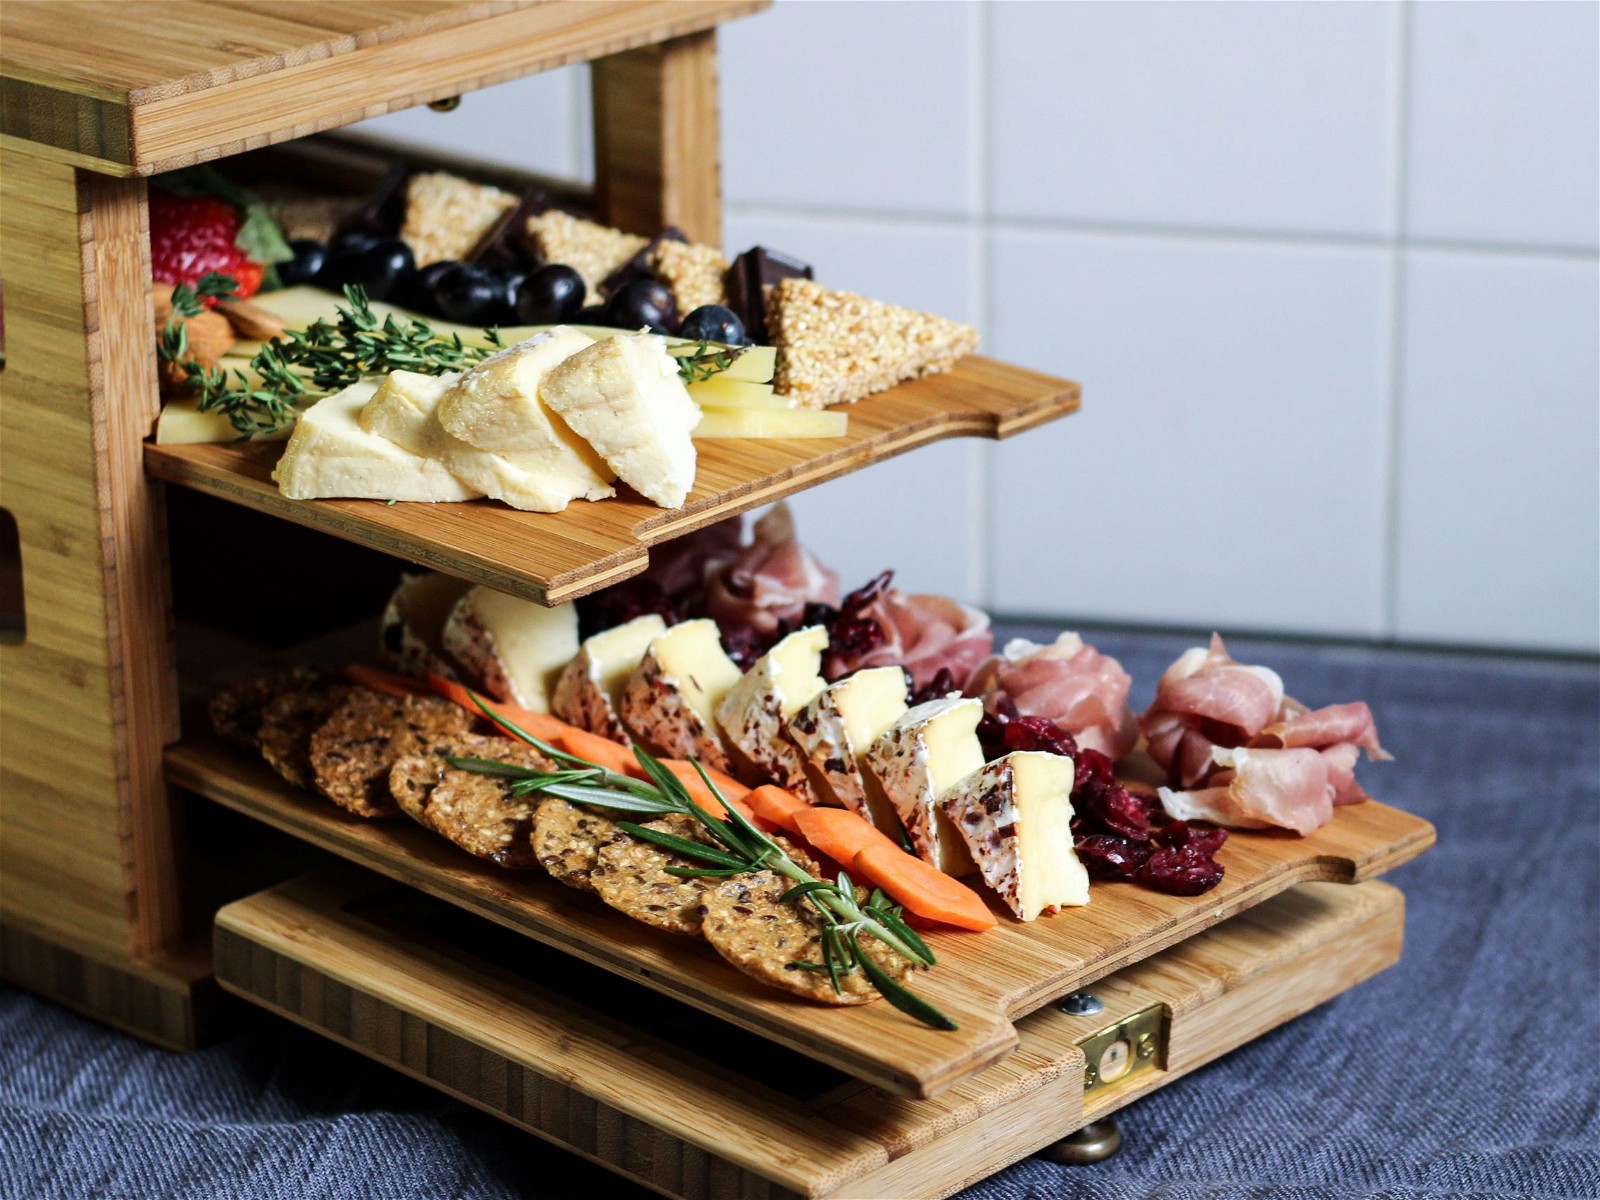 https://images.getrecipekit.com/20220426154909-two-20tiered-20cheese-20board.jpg?aspect_ratio=4:3&quality=90&